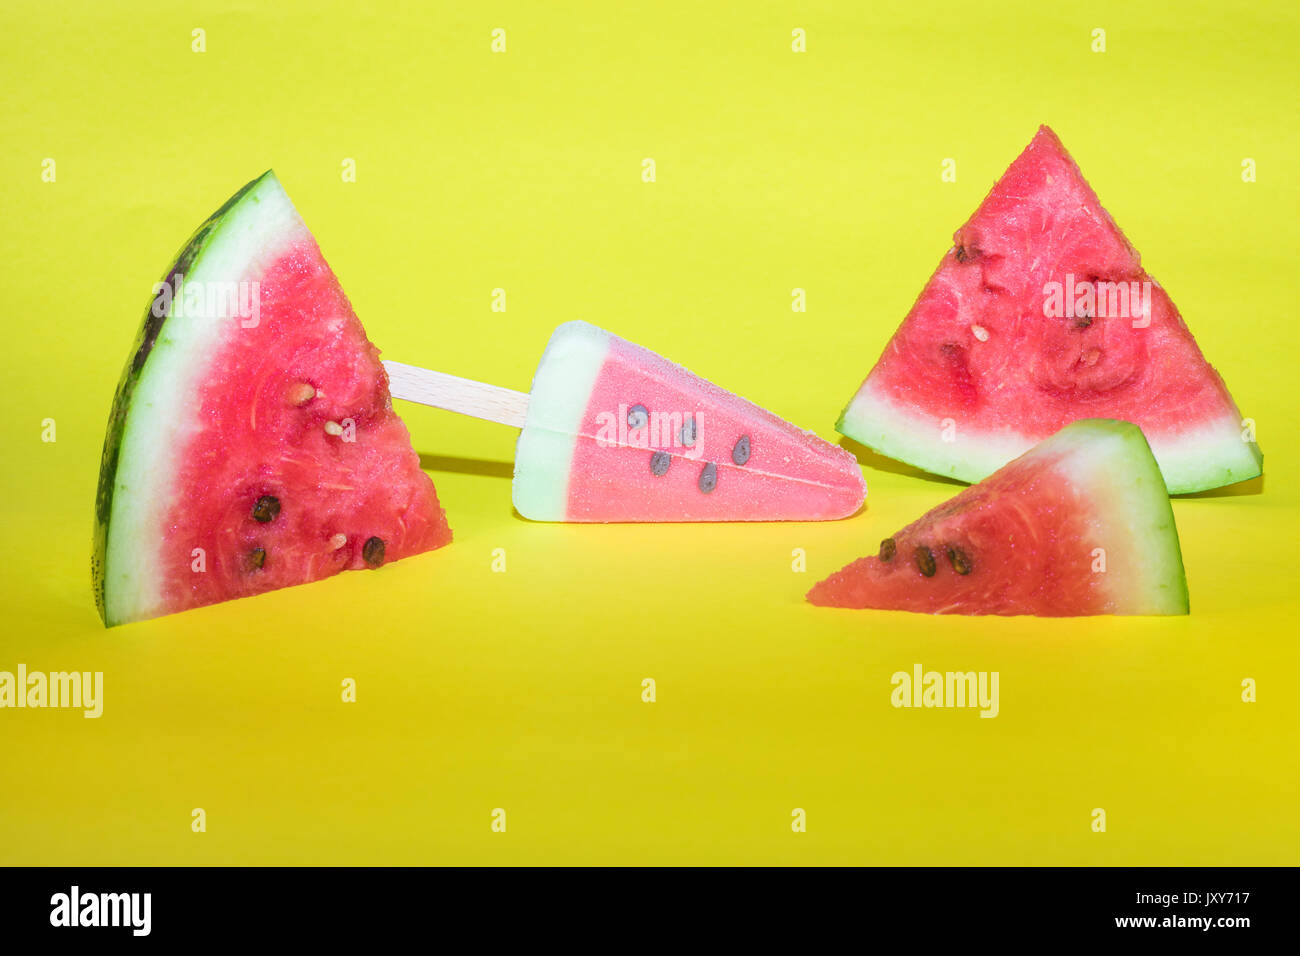 Watermelon slices and ice cream on yellow background Stock Photo